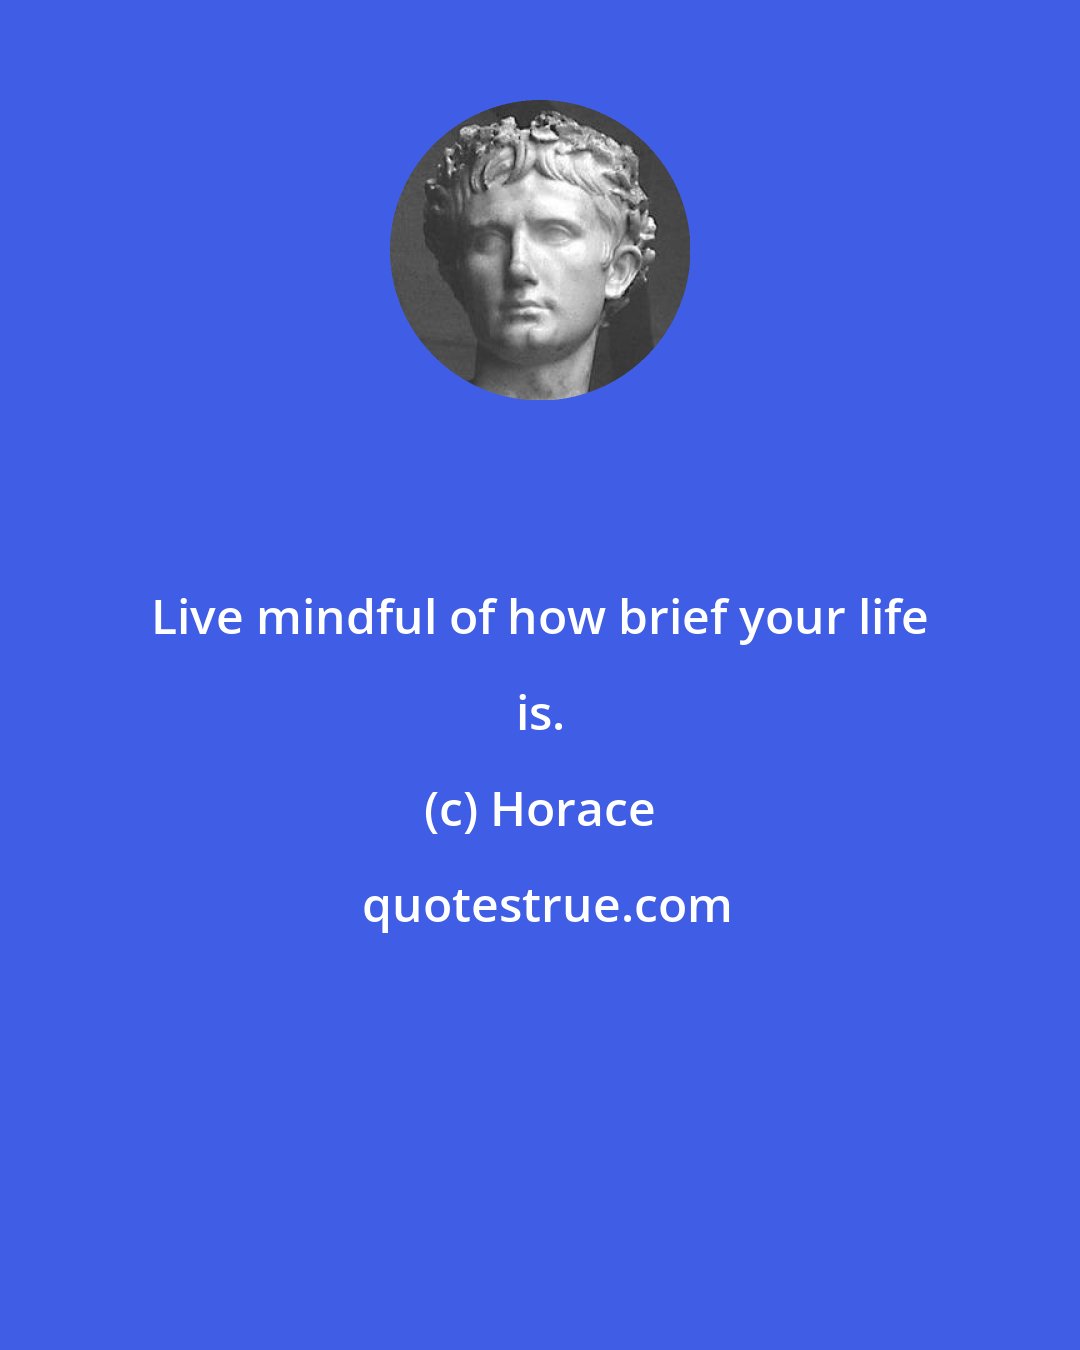 Horace: Live mindful of how brief your life is.